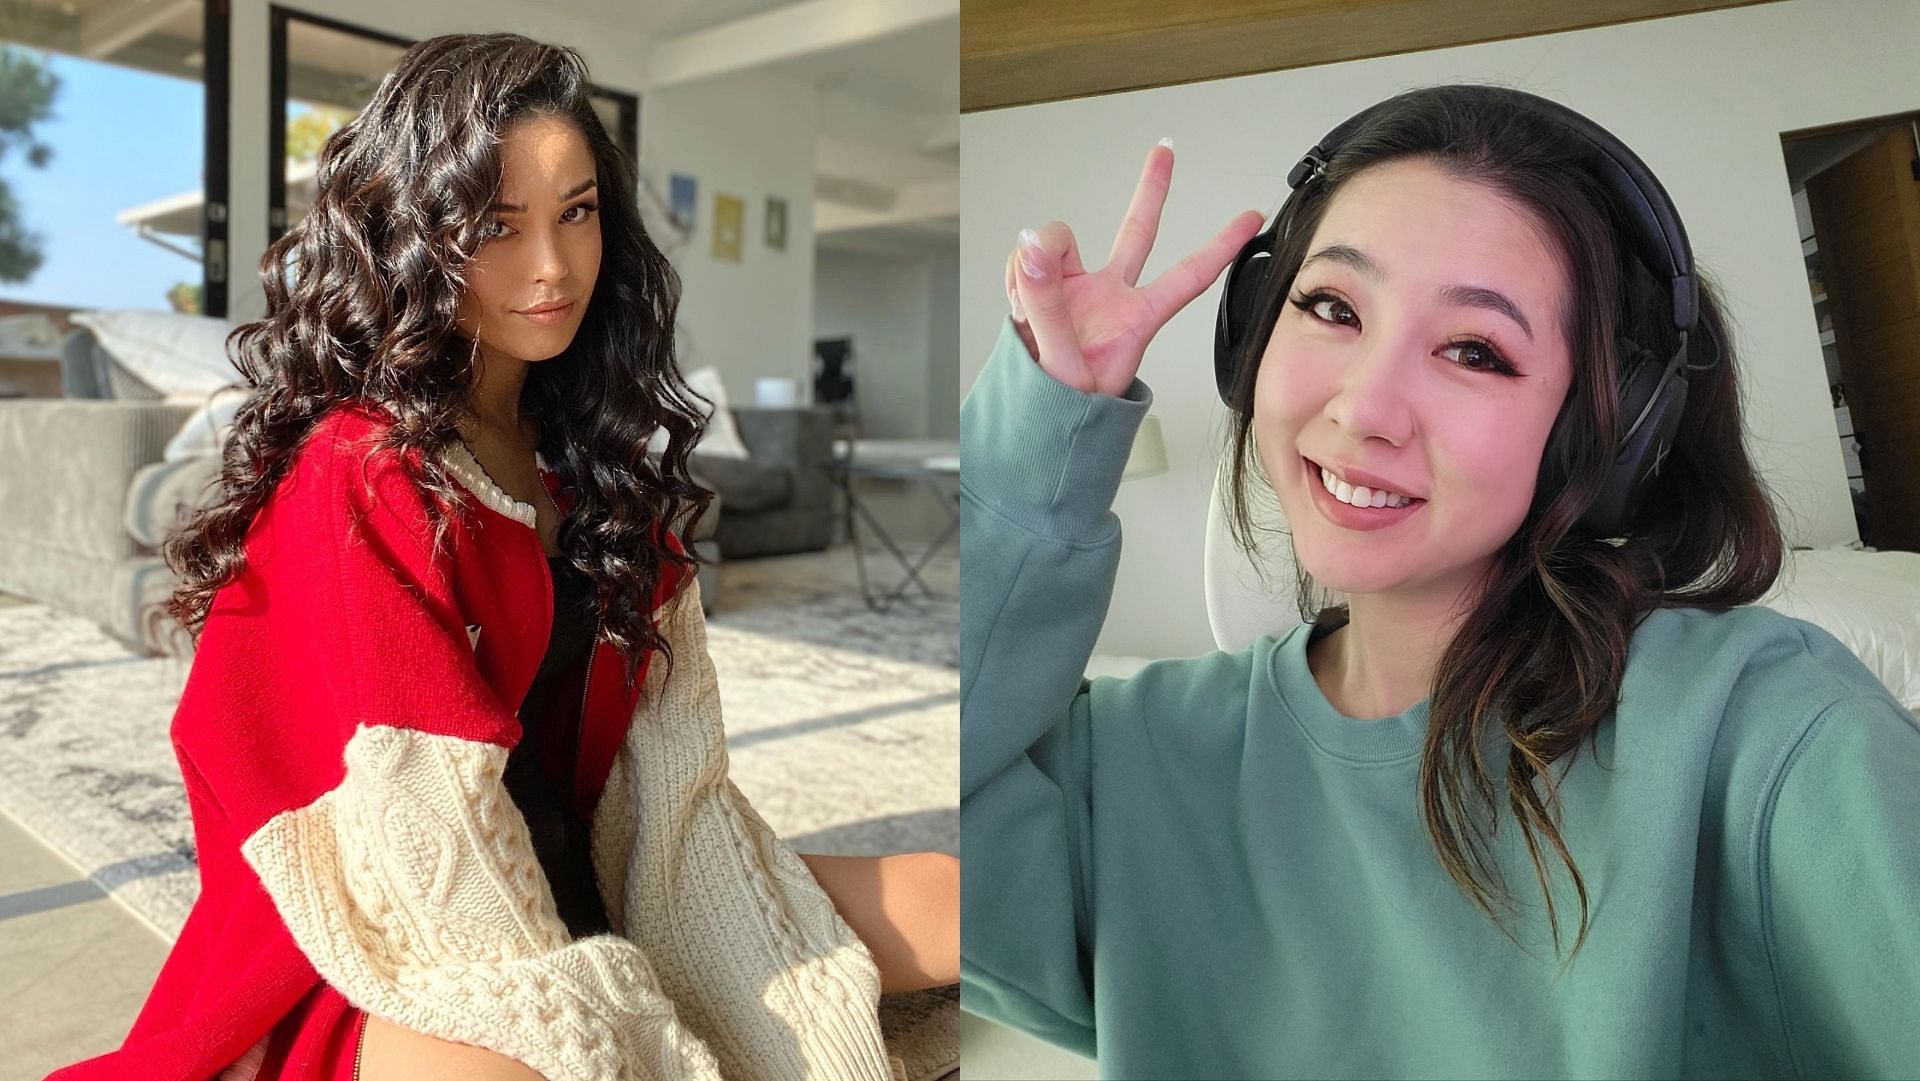 Valkyrae and the online community react to the viral moment when